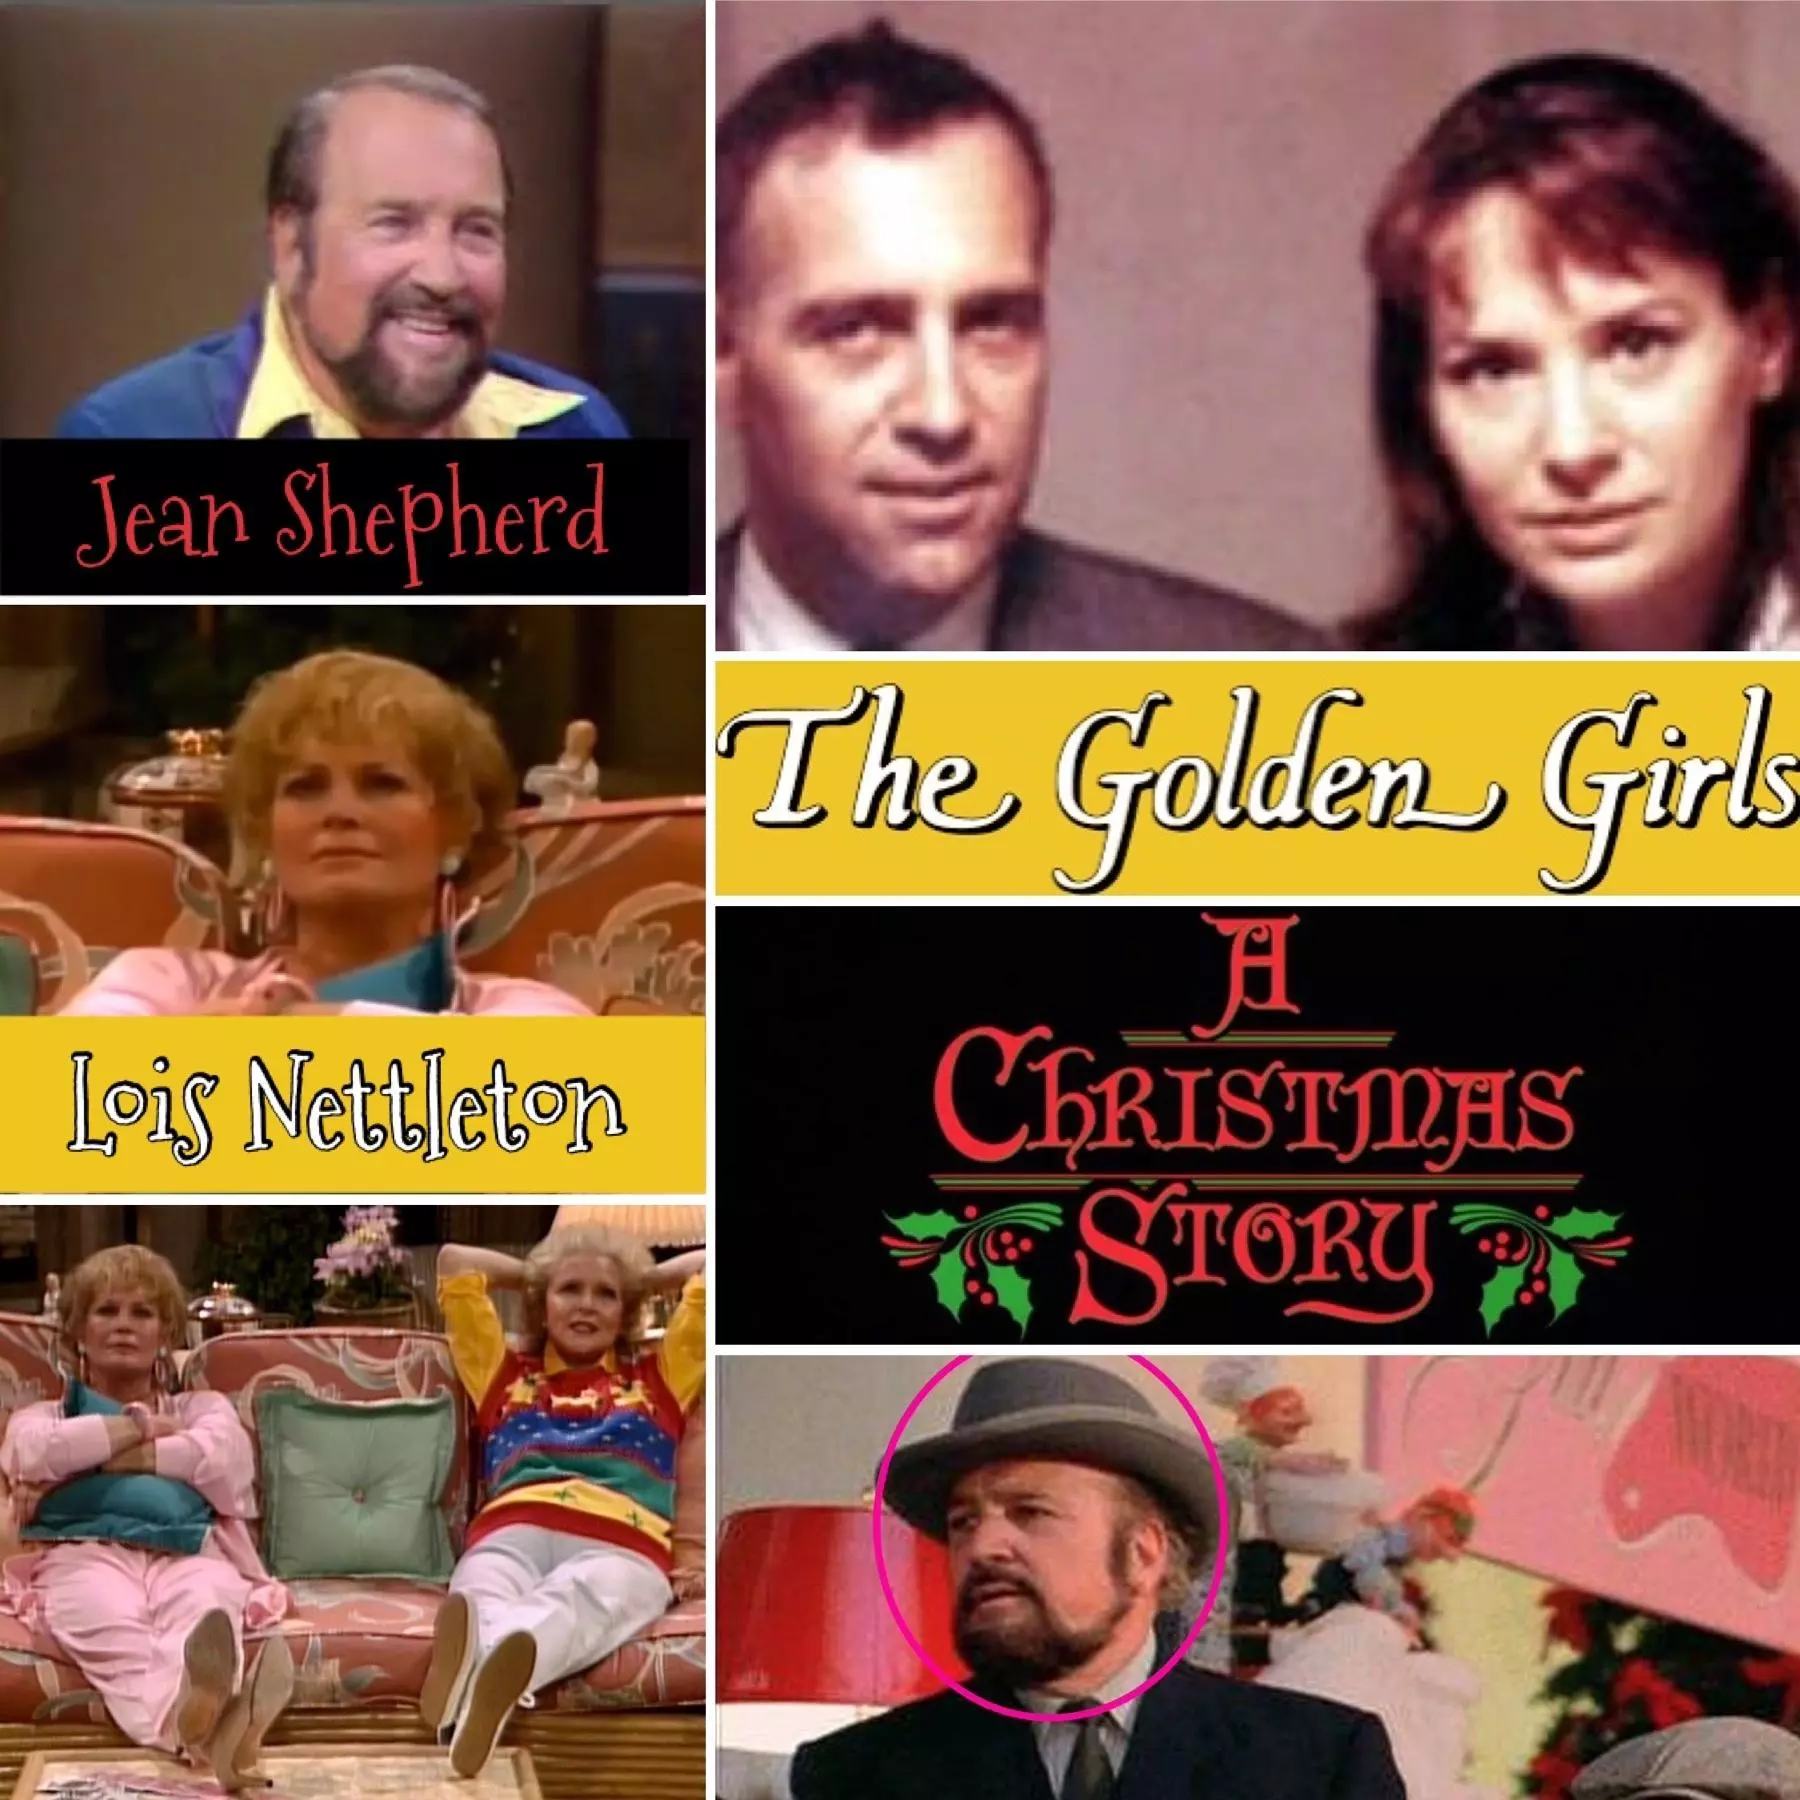 The Connection Between The Golden Girls and A Christmas Story